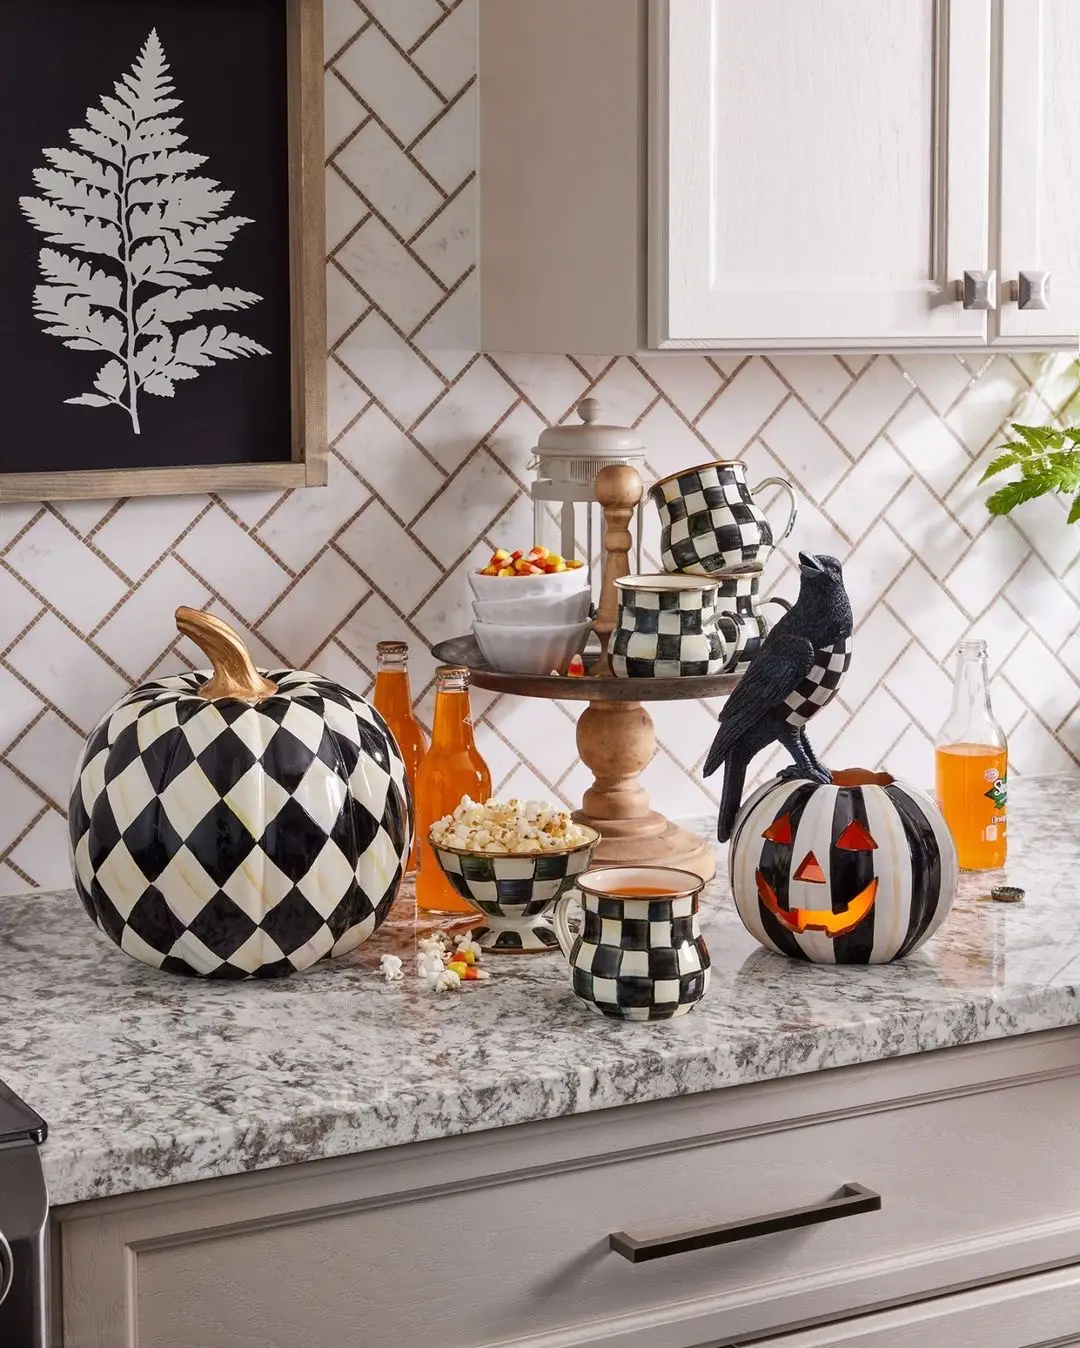 9 Ways to Decorate for Halloween That Youll Have so Much Fun with ...